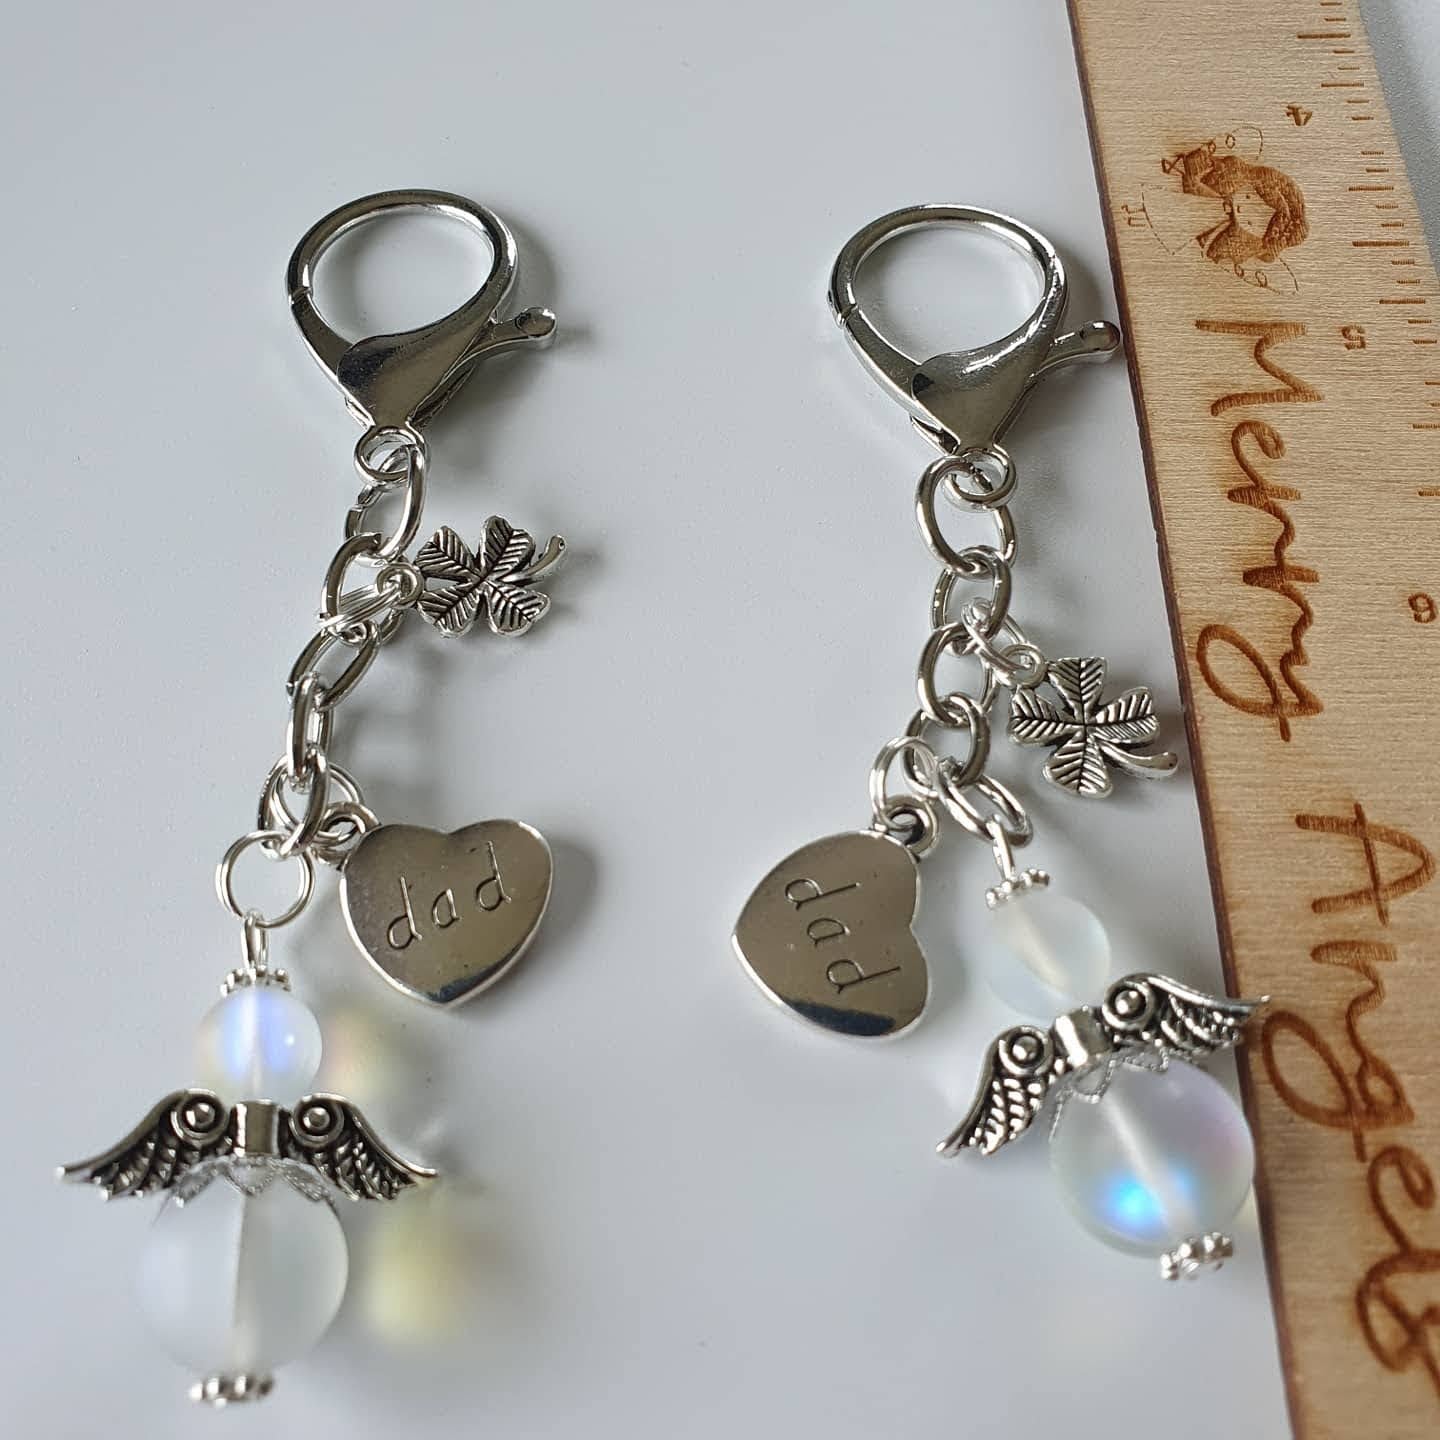 This is a picture of two silver angel keyrings, both keyrings have silver heart charms attached with the word 'dad' engraved on them and also silver shamrock charms